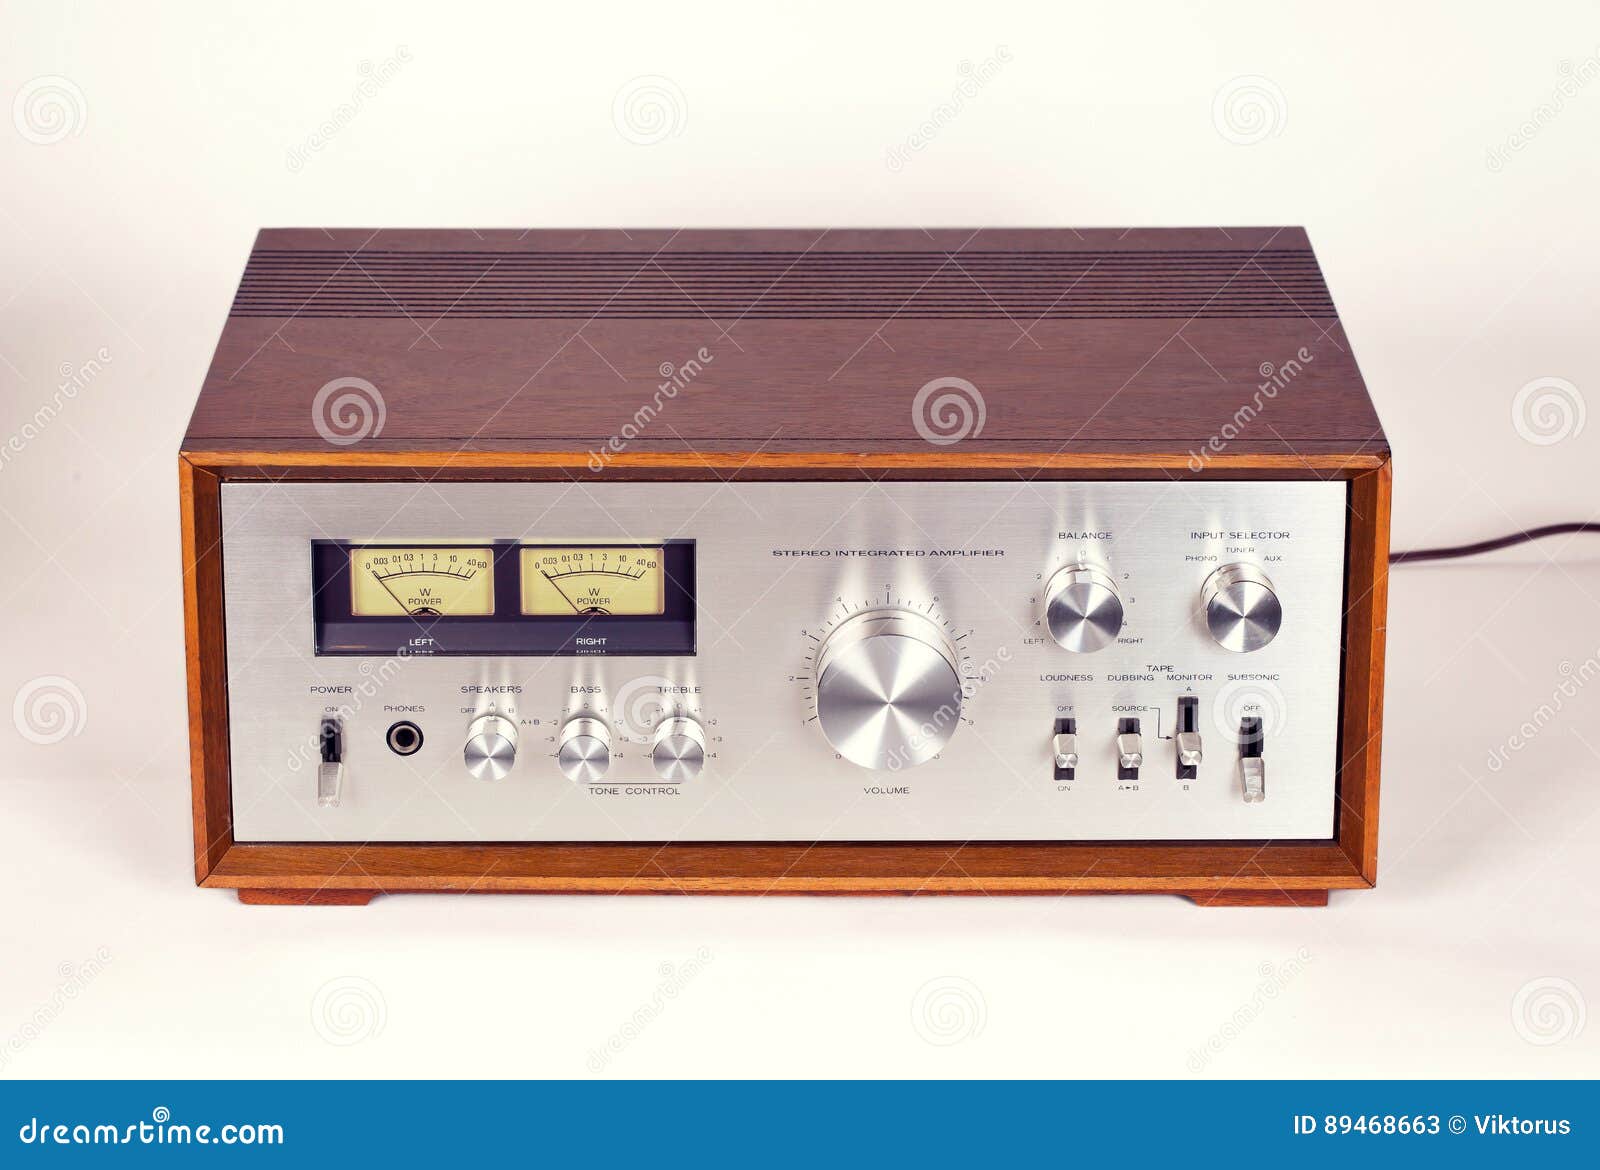 Vintage Stereo Audio Amplifier In Wooden Cabinet Stock Image